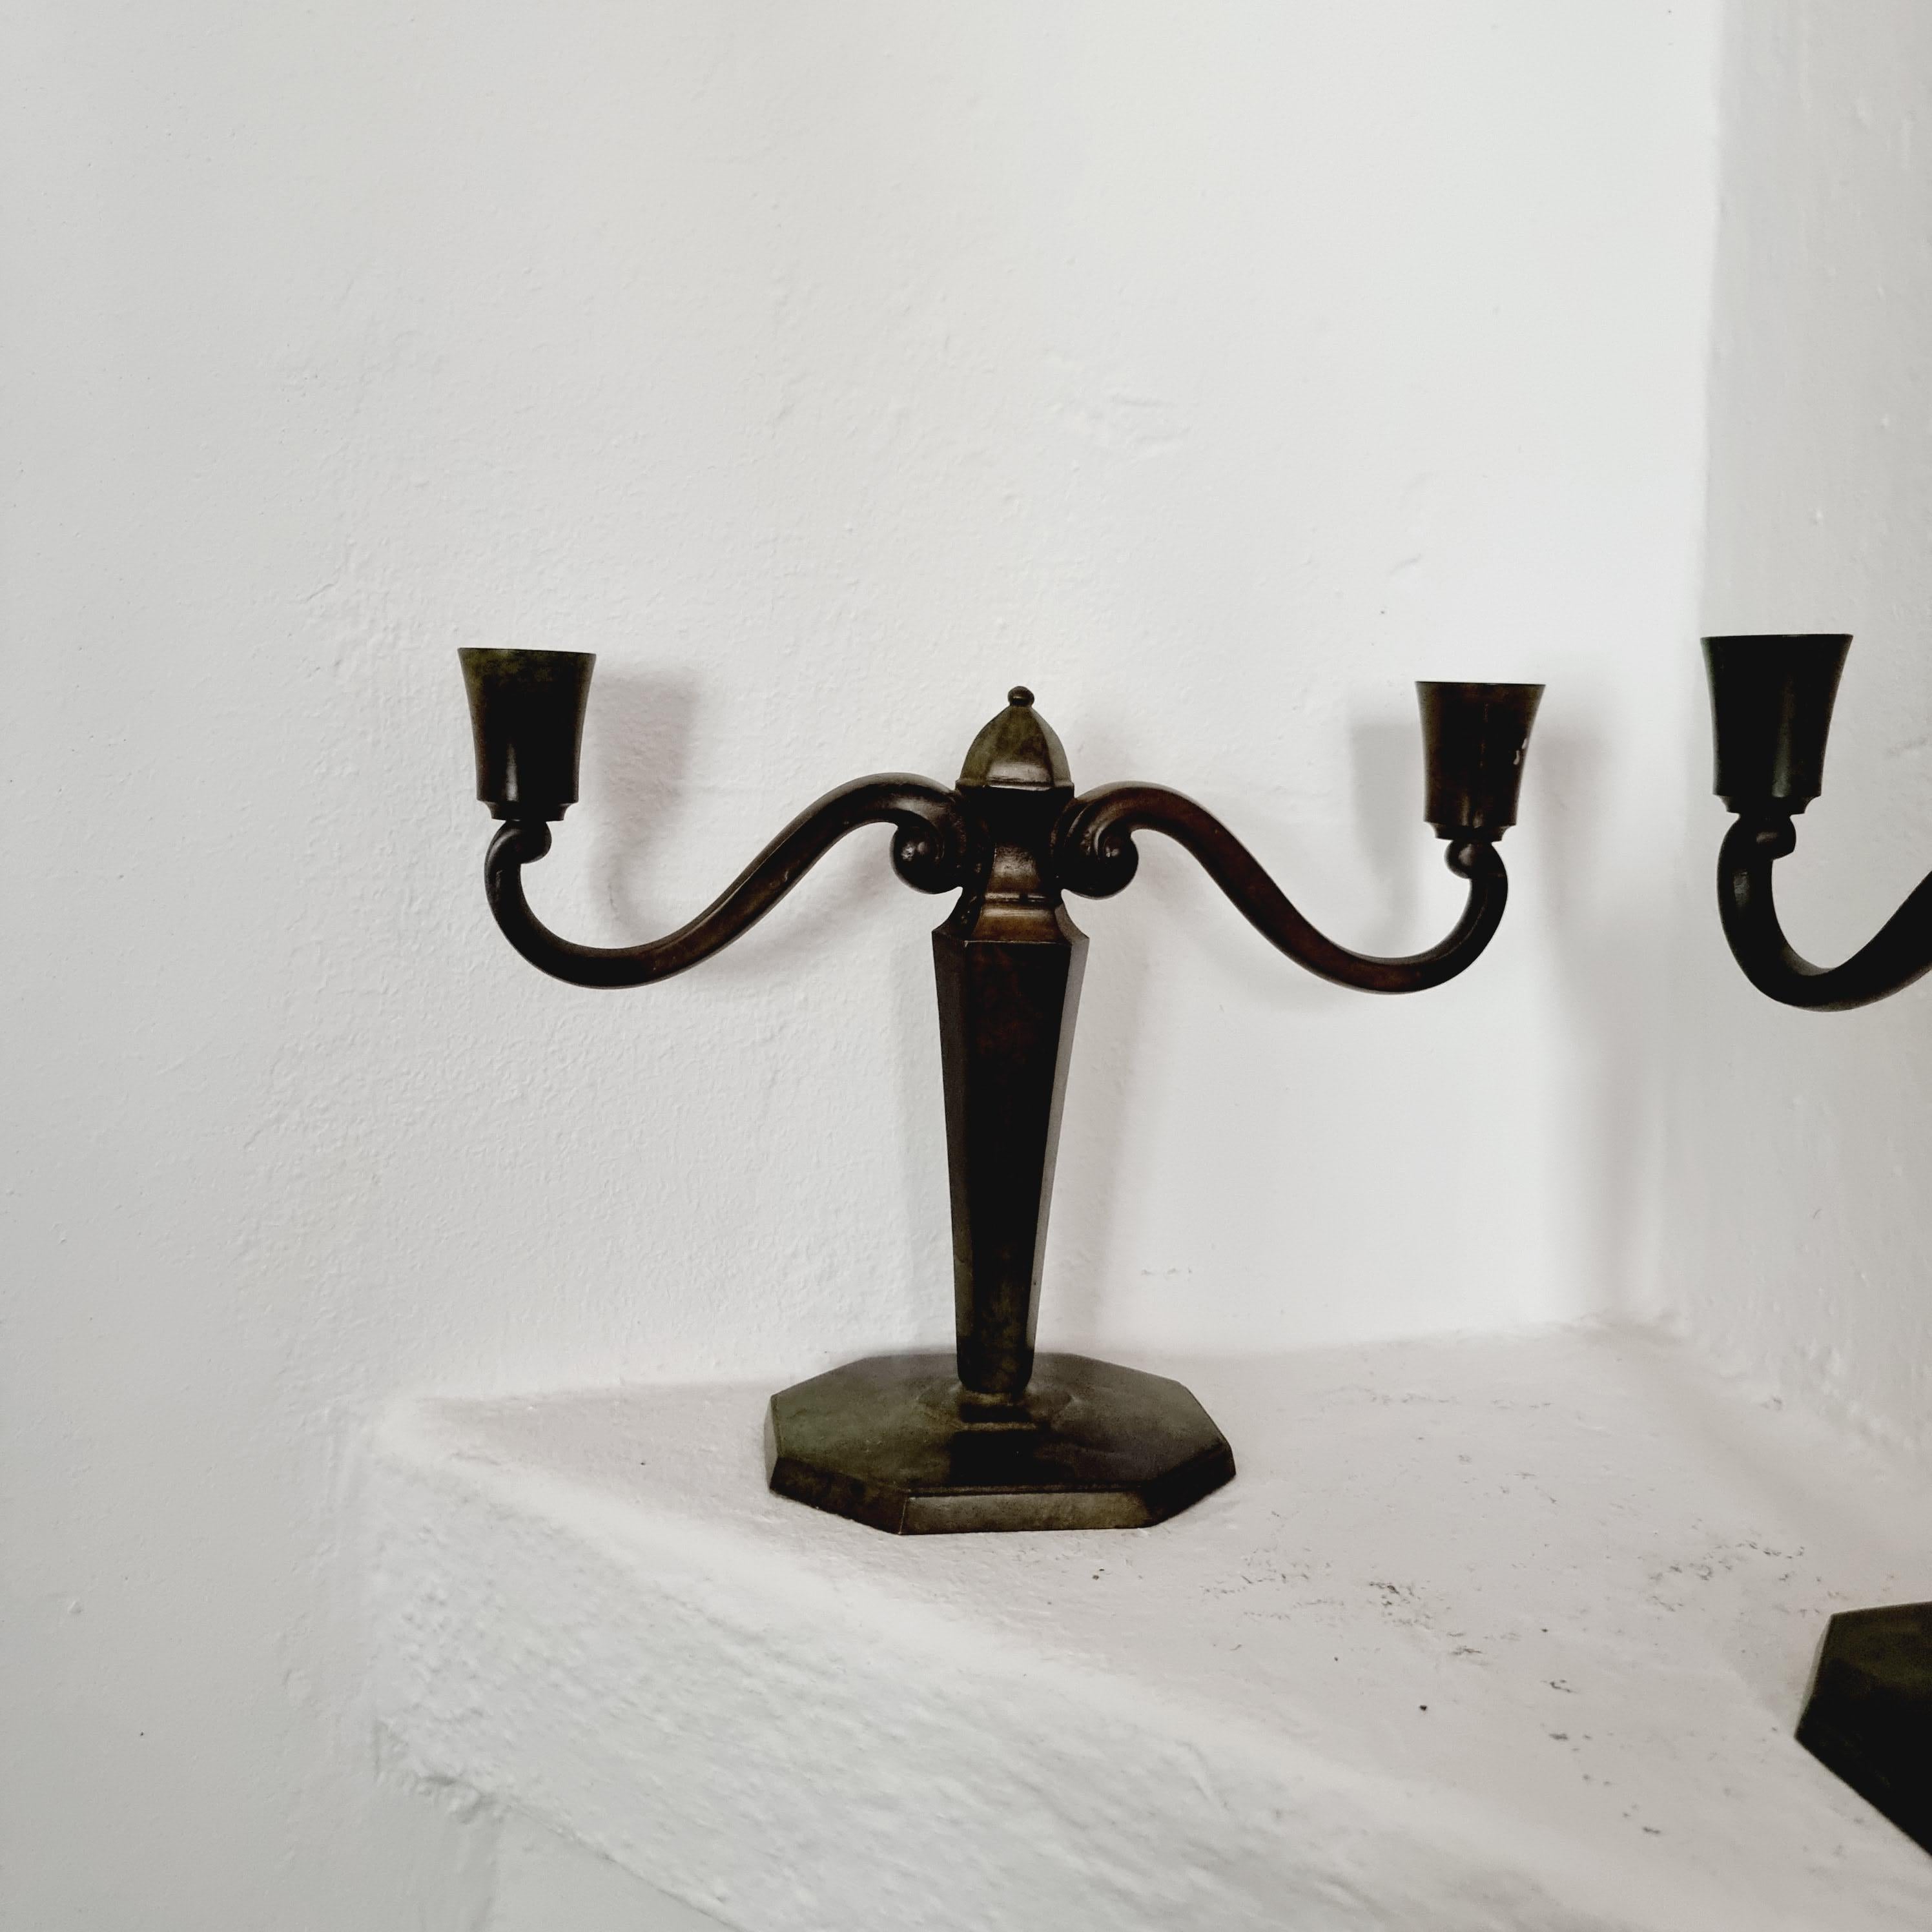 A elegant pair of solid bronze candelabras by Jacob Ängman for GAB / Guldaktiebolaget. With two candle holders each. Signed in bottom: GAB Brons.

